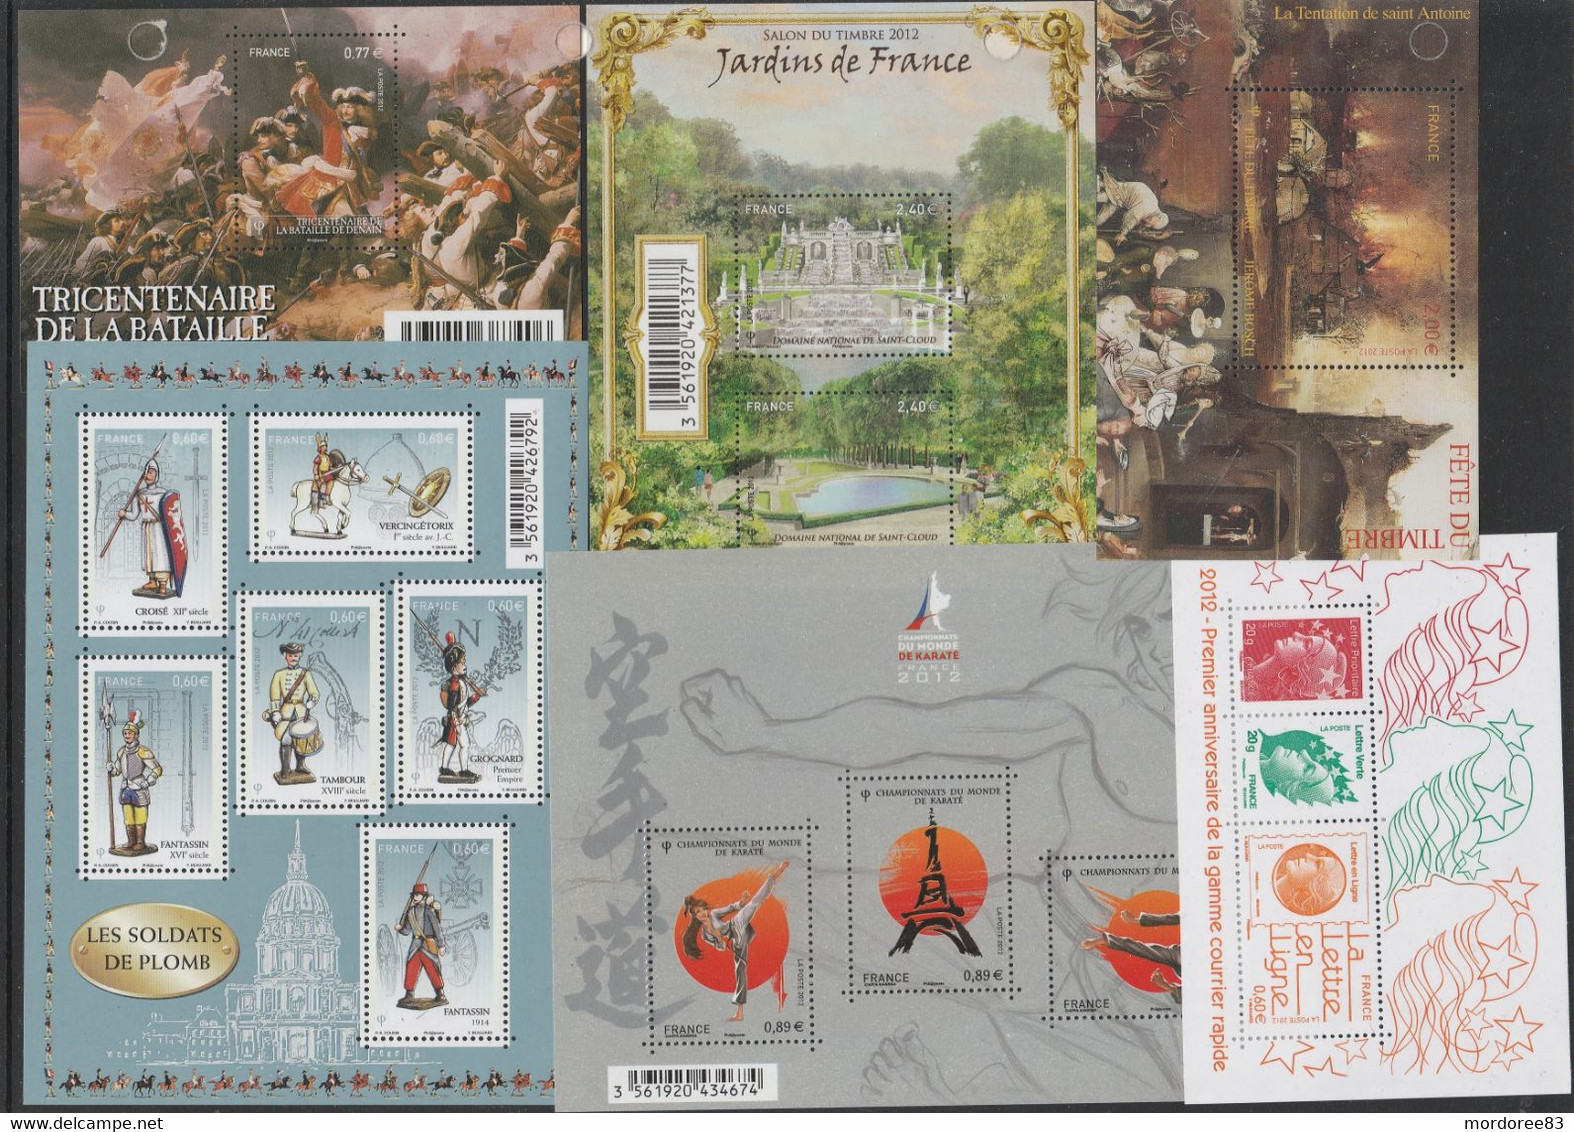 FRANCE 2012 ANNEE COMPLETE 97 TIMBRES NEUF YT 4631 A 4710 - VOIR 4 SCANS - 2010-2019